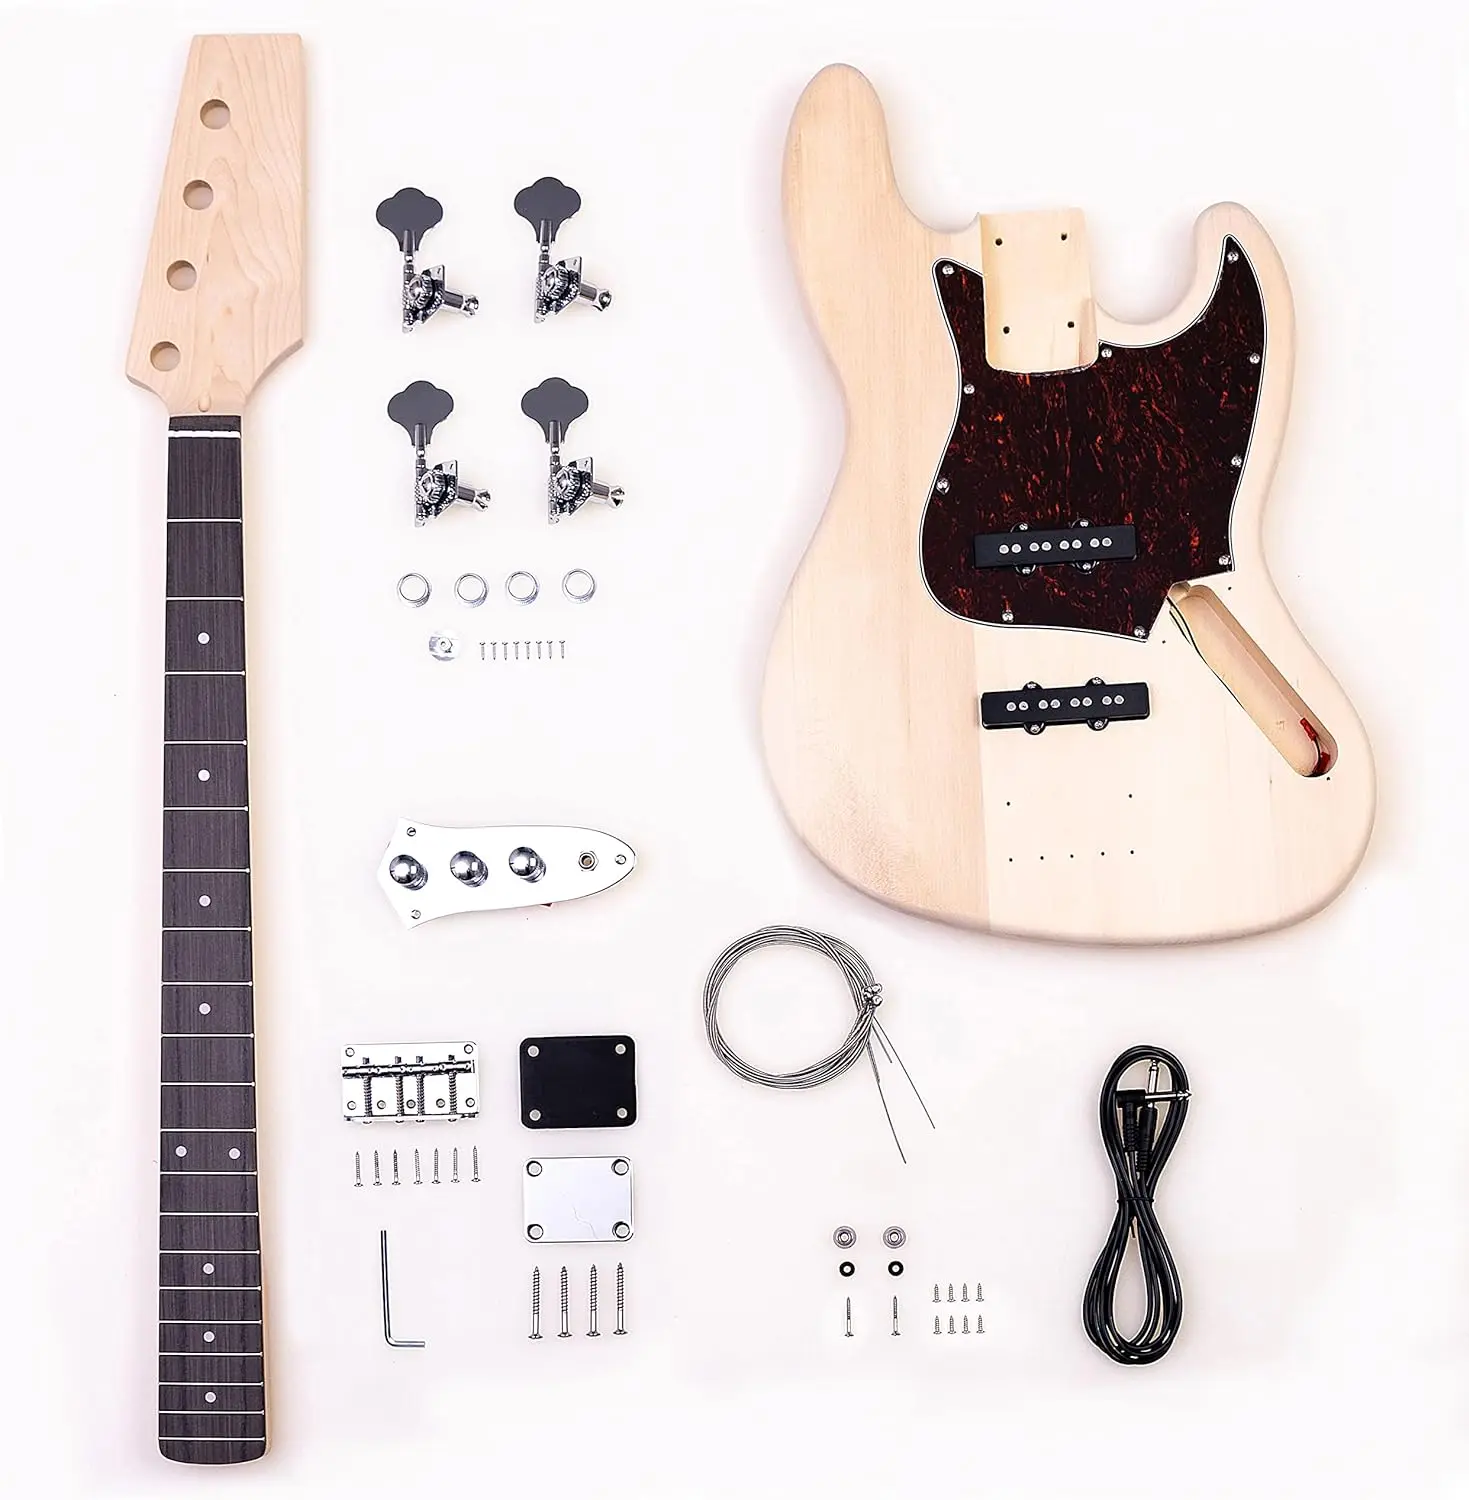 

DIY Bass Guitar Kit,JB Bass Guitar,4 String Right Handed with Basswood Body,Build Your Own Bass Guitar.